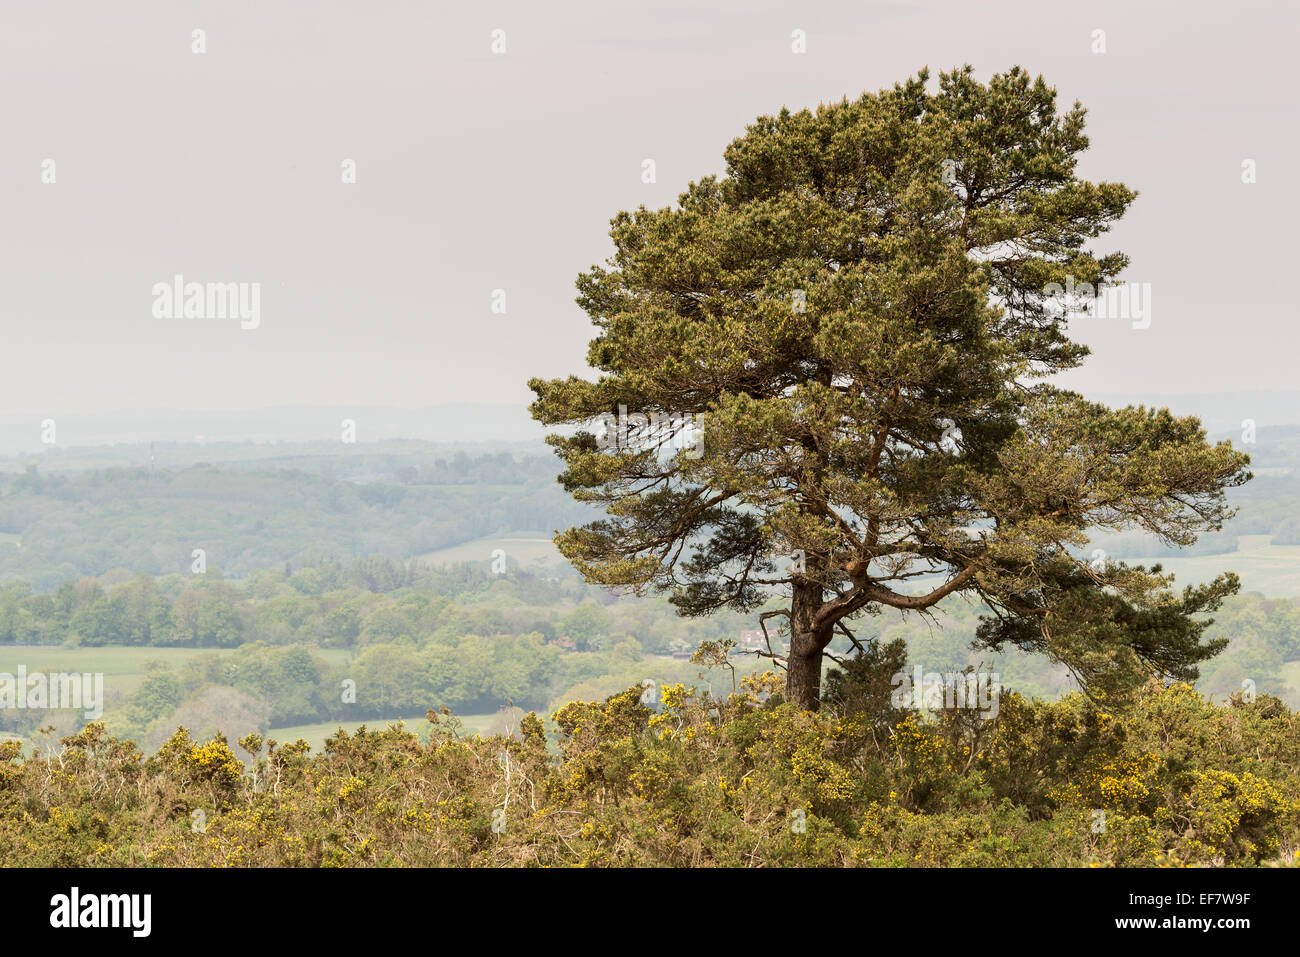 Lone pine tree on a ridge in Ashdown Forest. The area features in the children's books by AA Milne, featuring Winnie the Pooh and Christopher Robin. Stock Photo